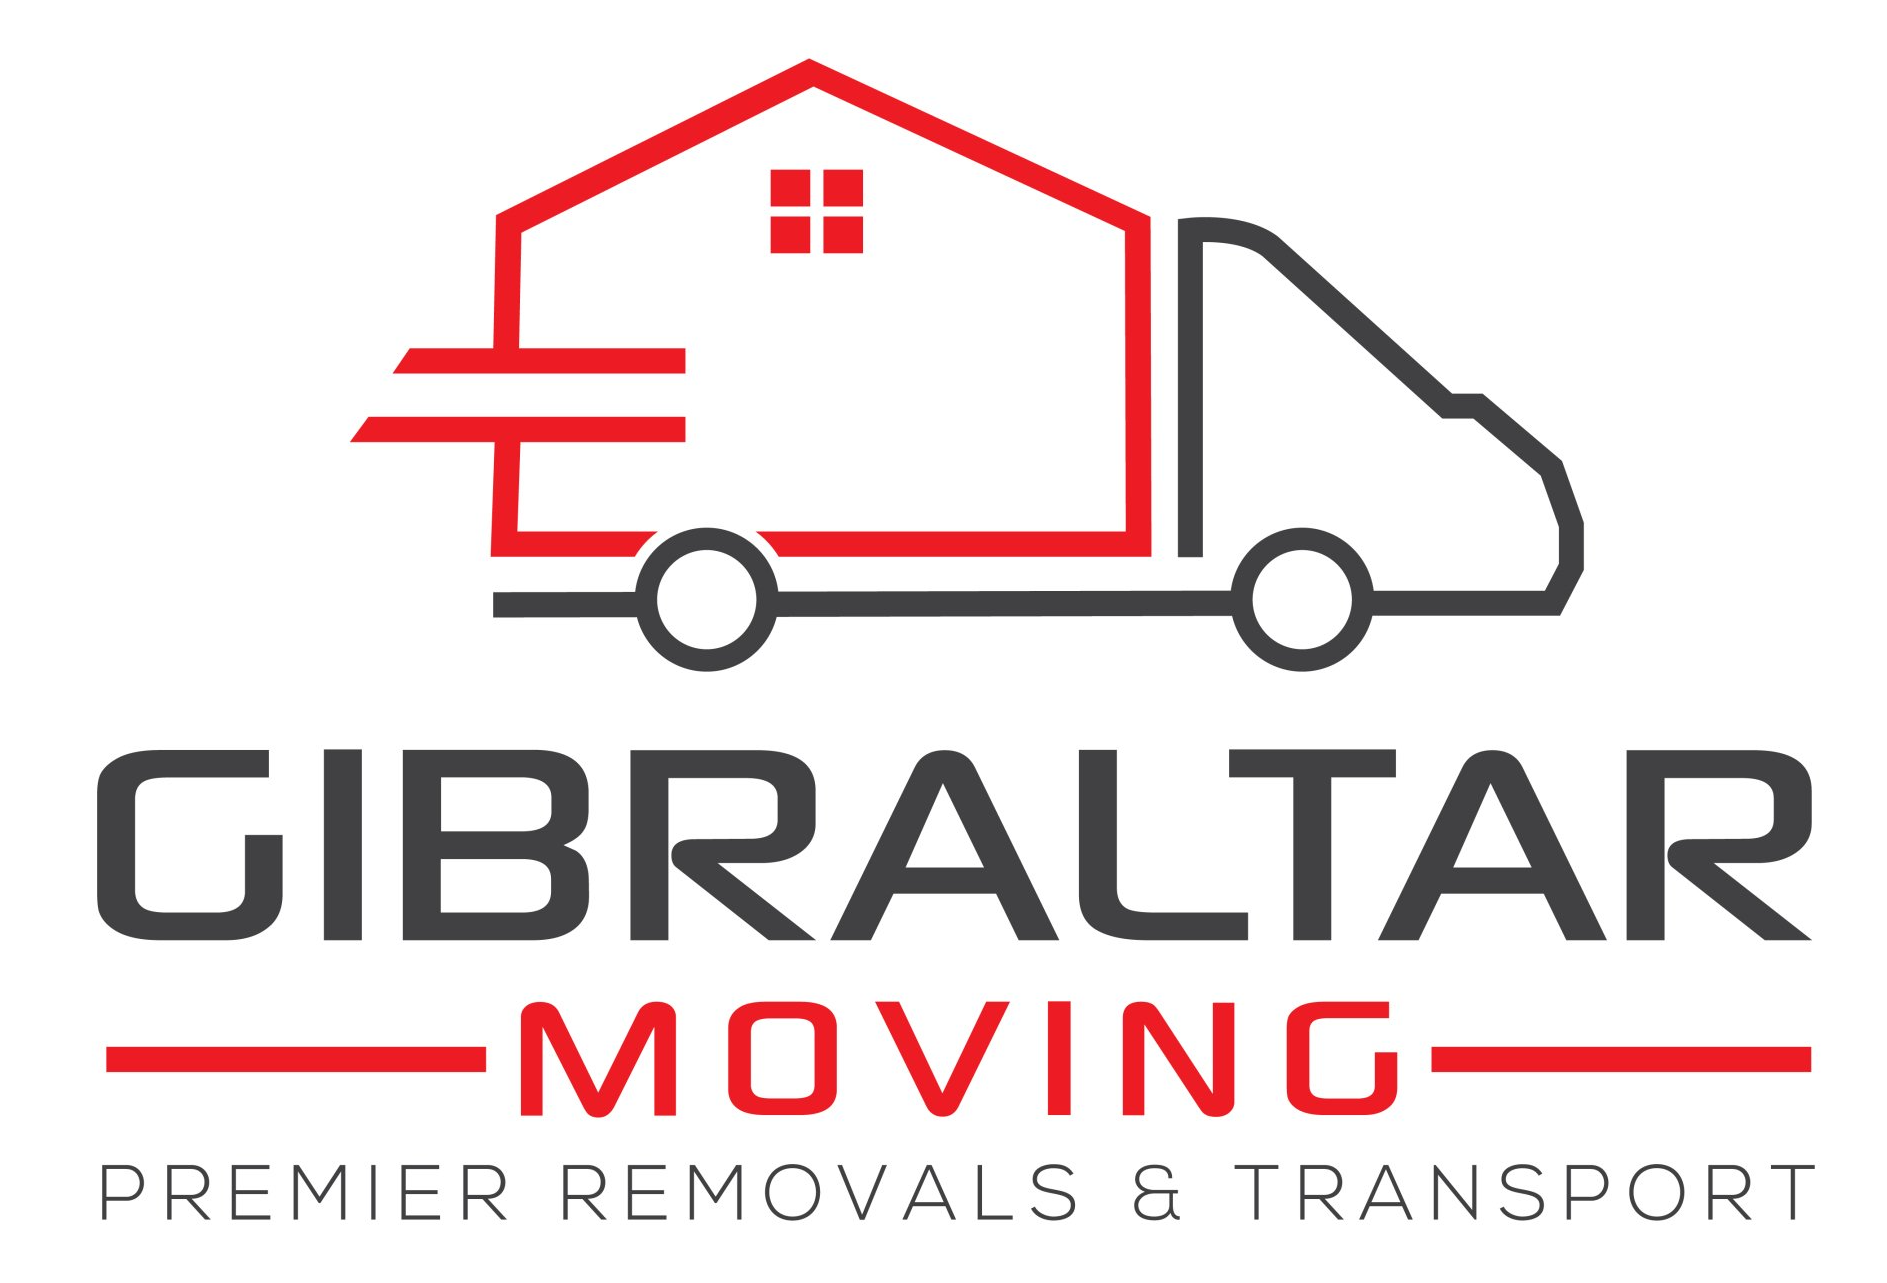 House removals Gibraltar to the UK and beyond